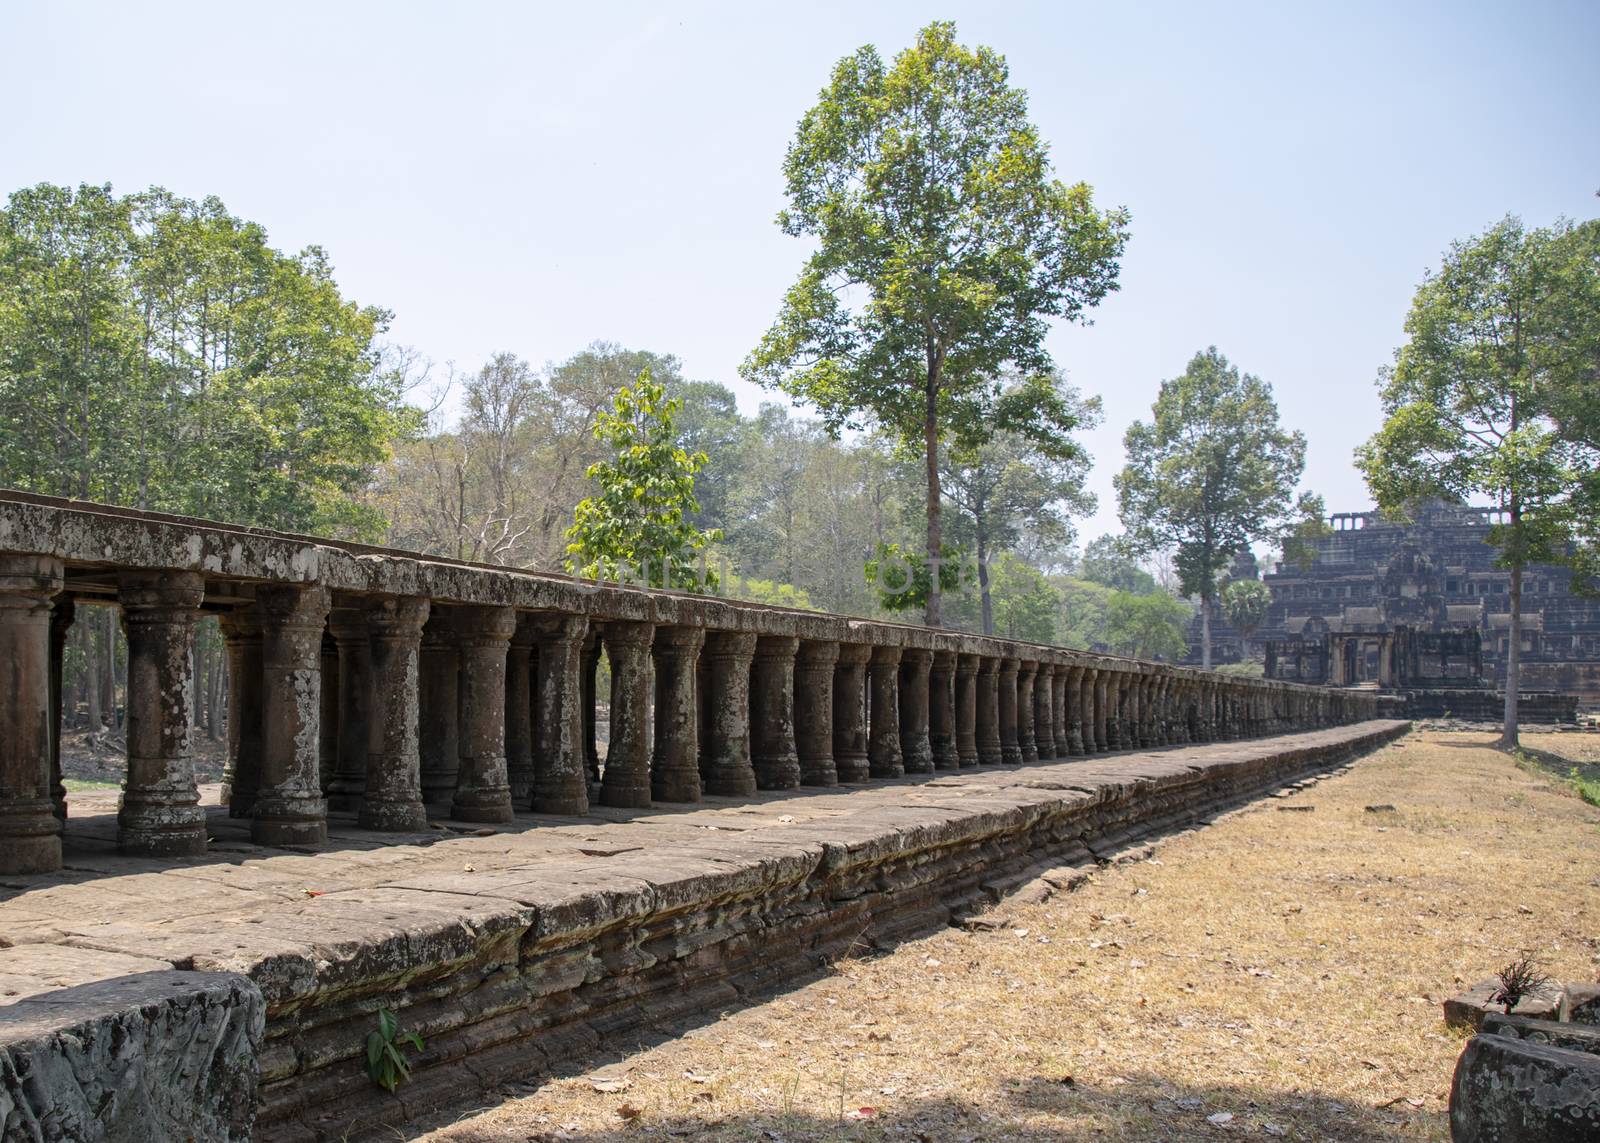 Angkor Thom, Cambodia, March 2016: A stone causeway supported by many finely carved columns provides an impressive entrance to the Baphuon temple mountain.